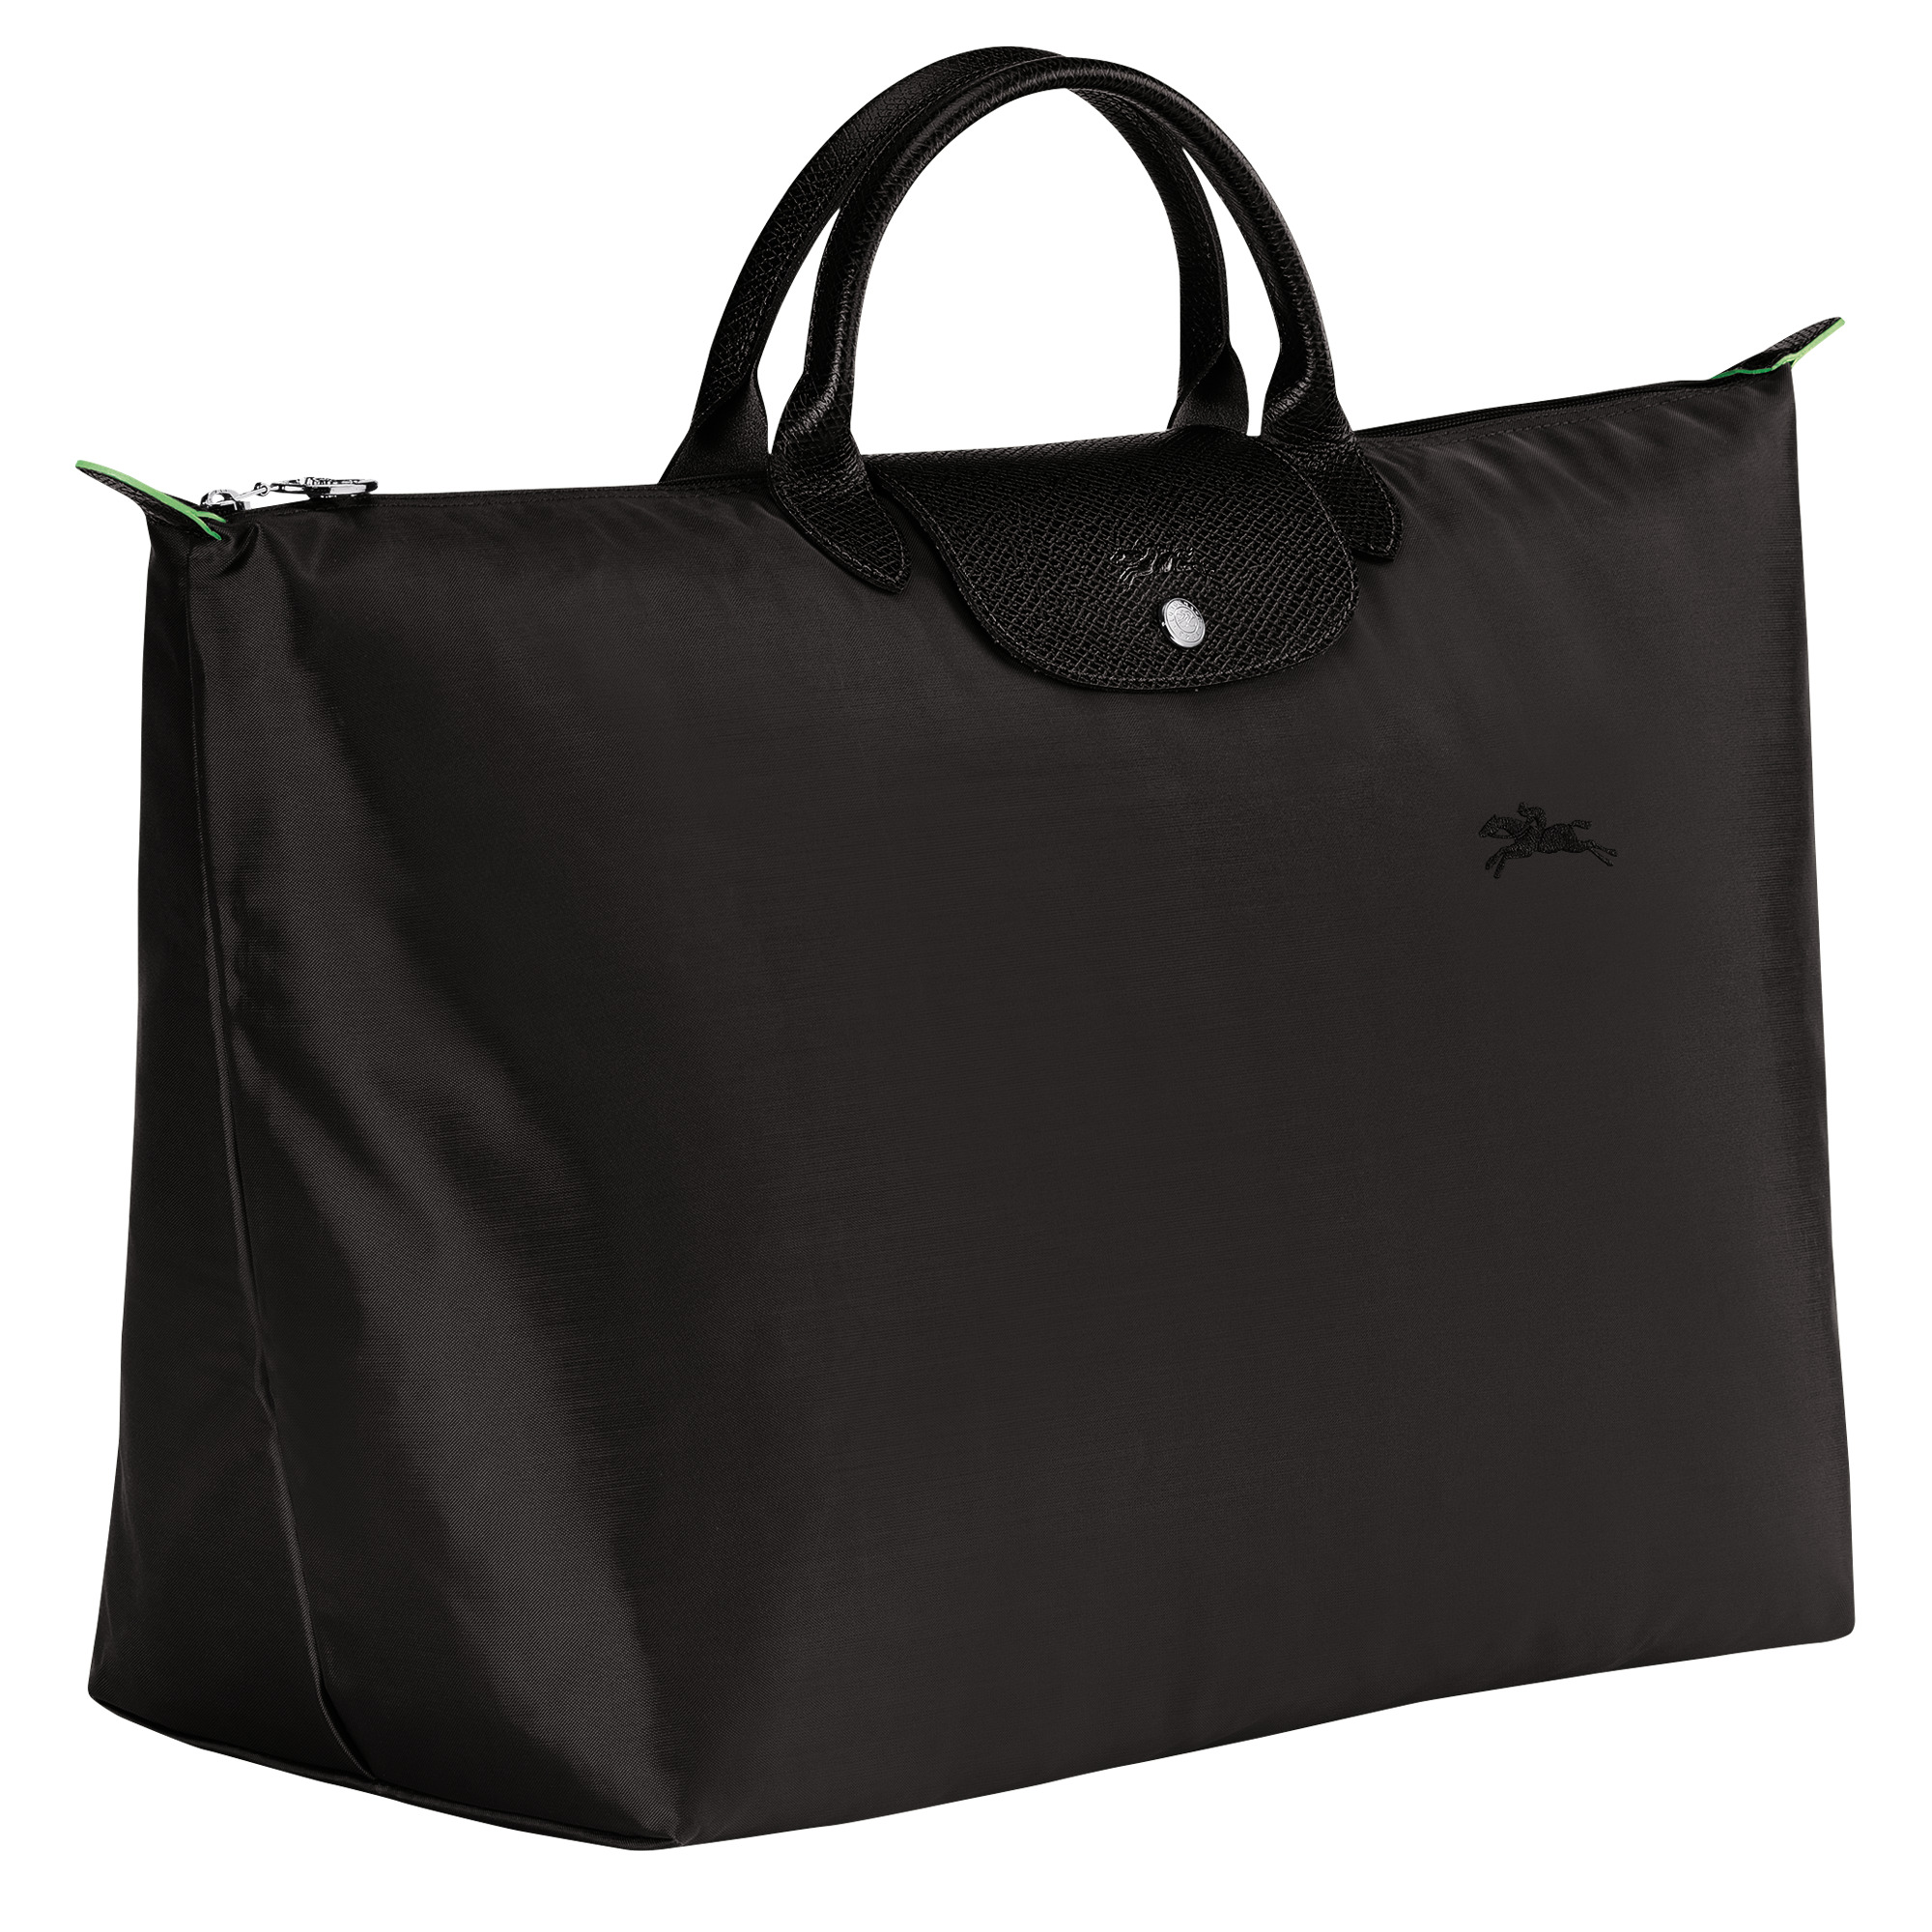 Le Pliage Green S Travel bag Black - Recycled canvas - 3